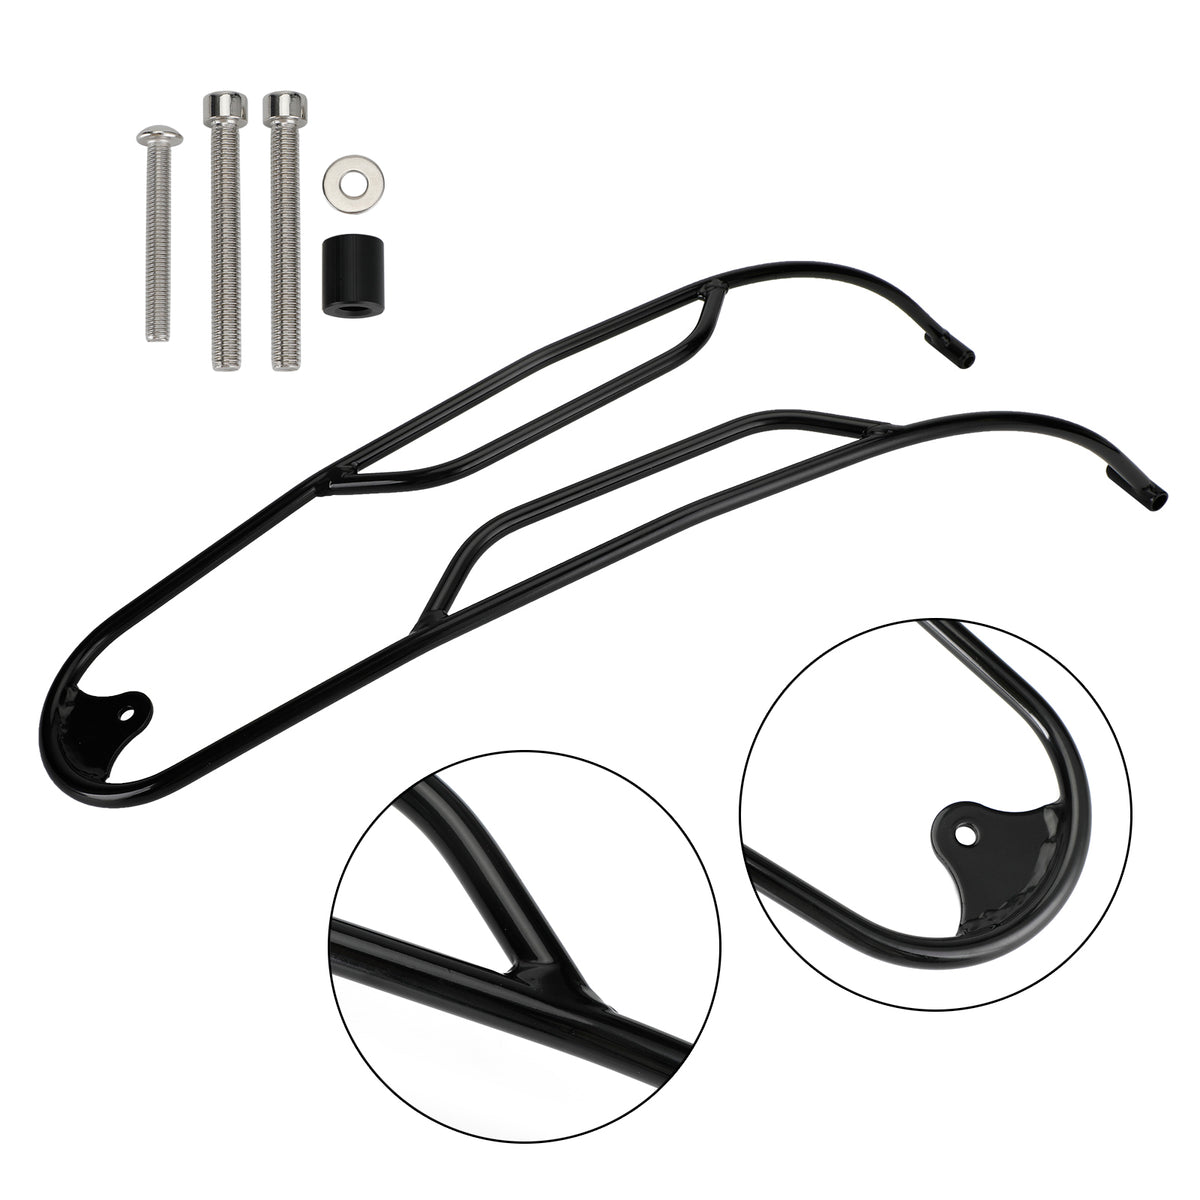 Crash Bars Falling Frame Gas Fuel Tank Guard Bumpers Fit For Bmw R18 Classic